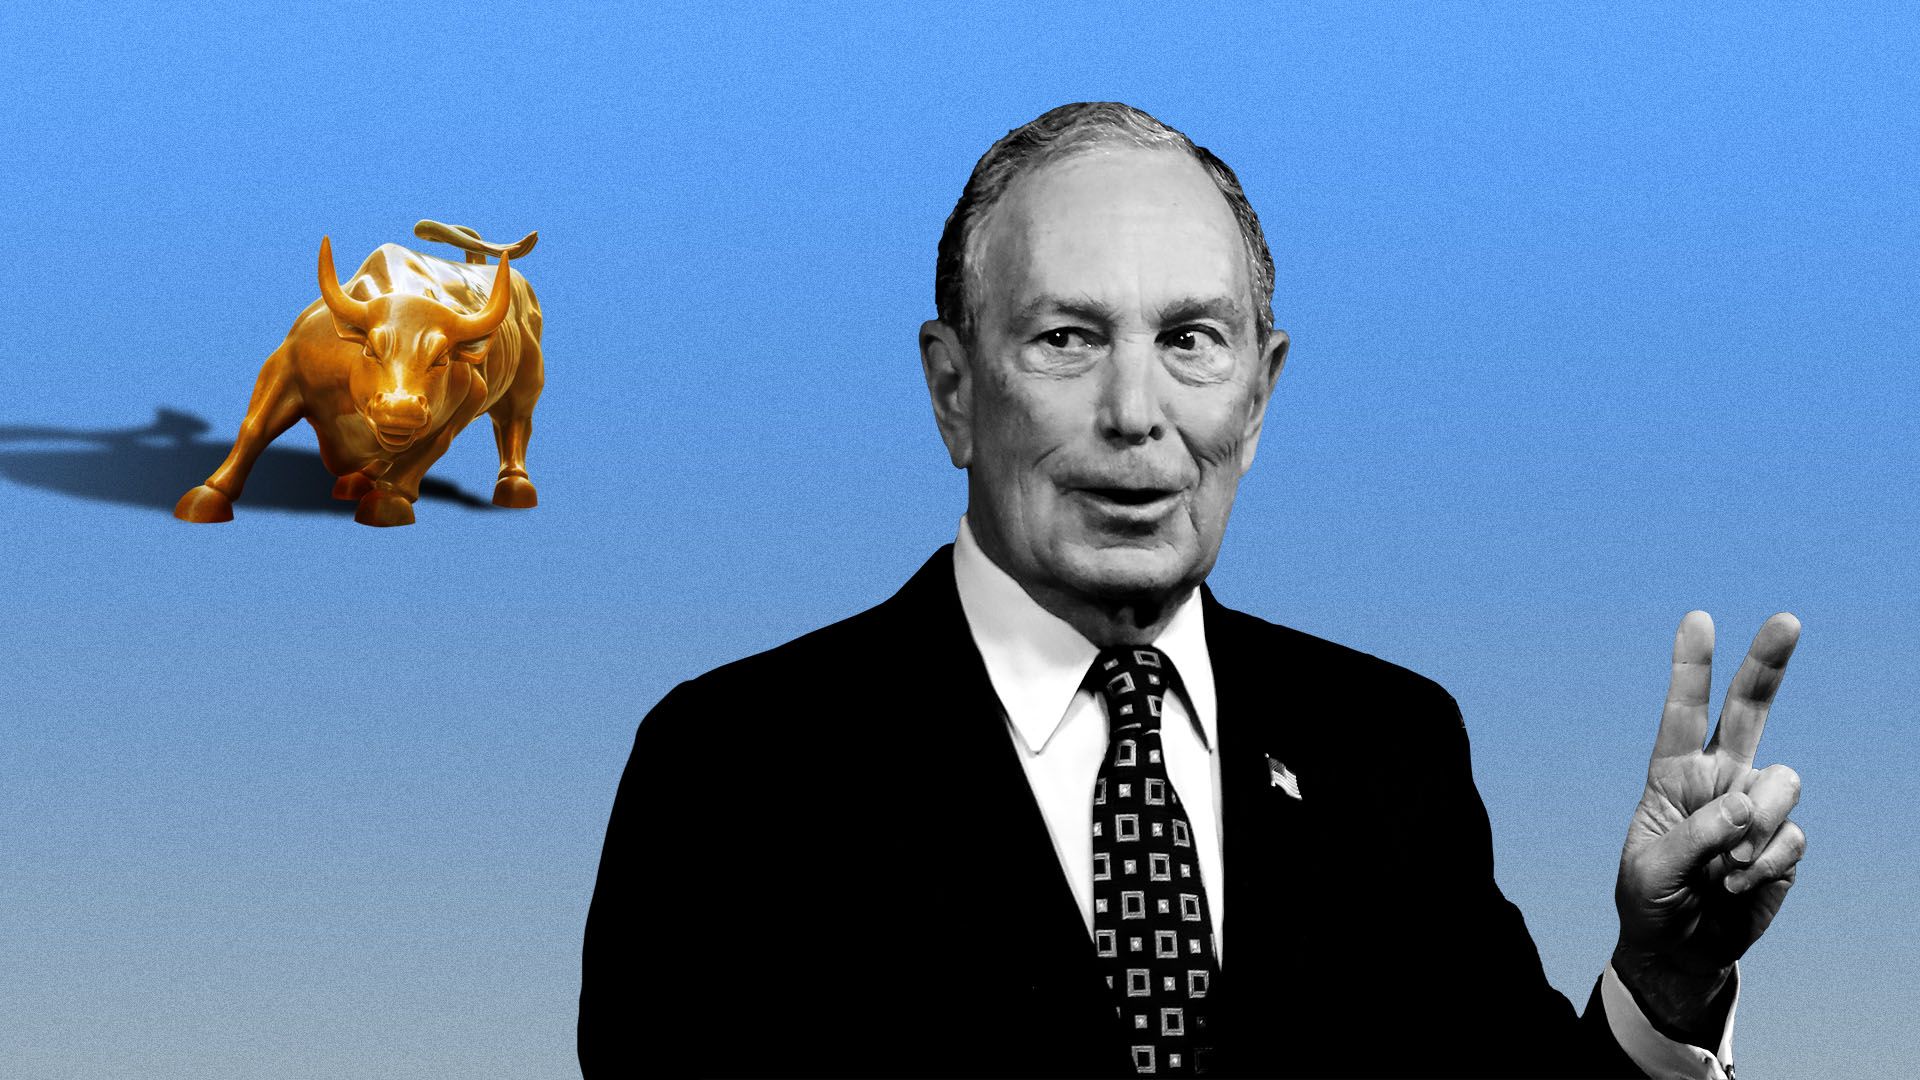 Photo illustration of Michael Bloomberg making a peace sign while looking at a small Wall Street bull